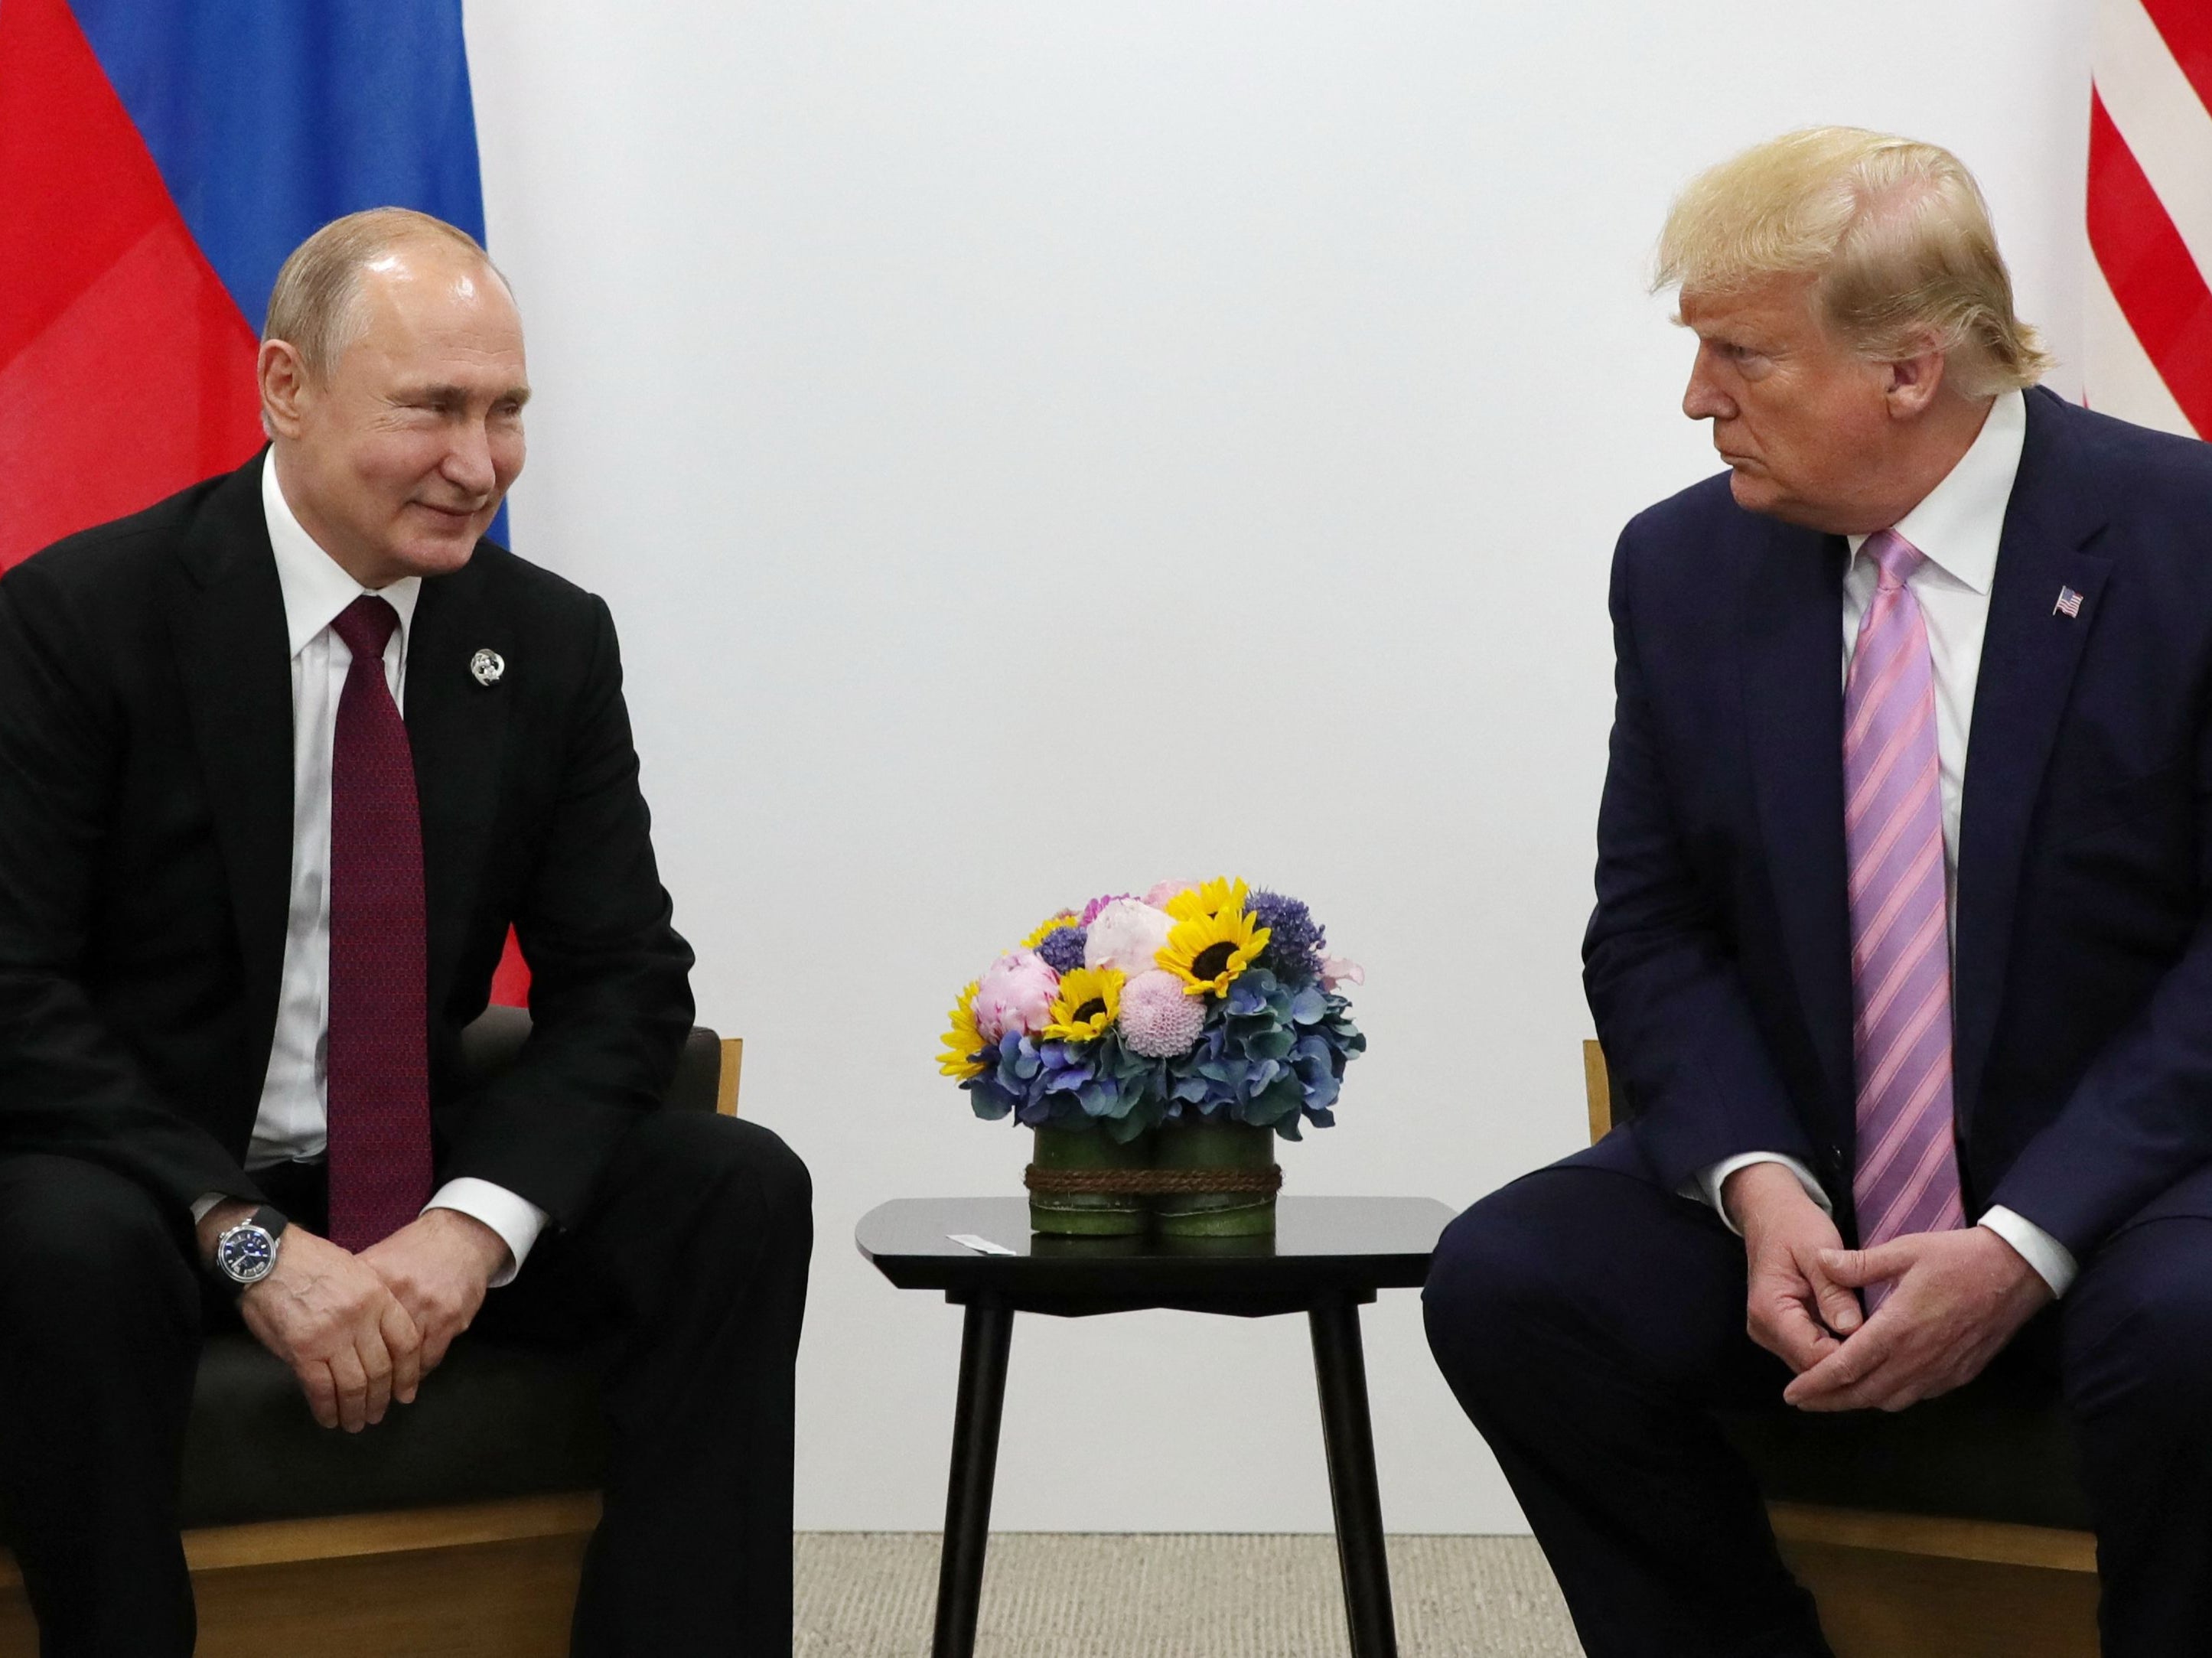 Russian President Vladimir Putin and US President Donald Trump hold a meeting on the sidelines of the G20 summit in Osaka on June 28, 2019